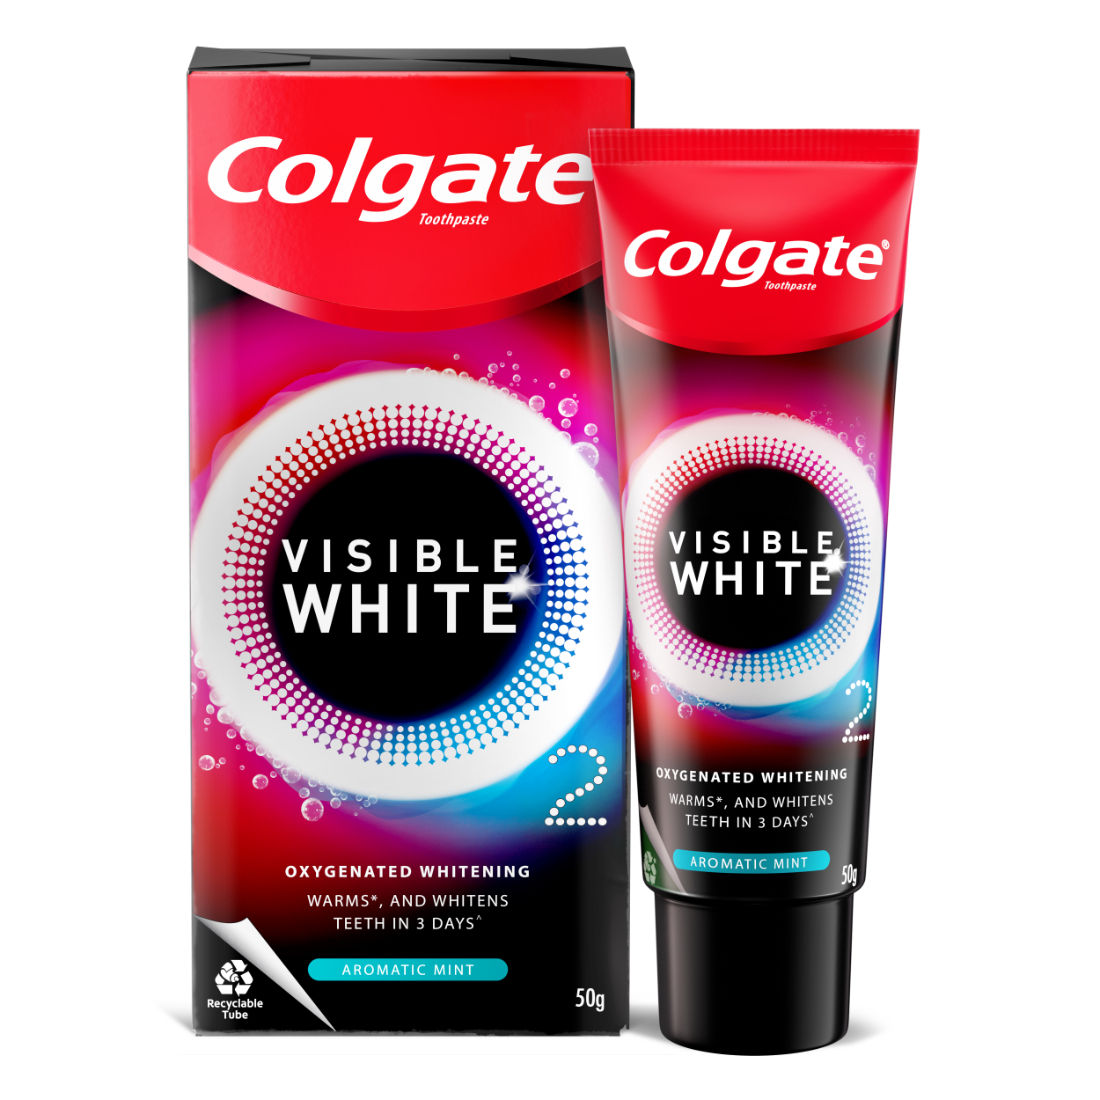 Buy Colgate Visible White O2 Whitening Aromatic Mint Toothpaste, 50 gm Online